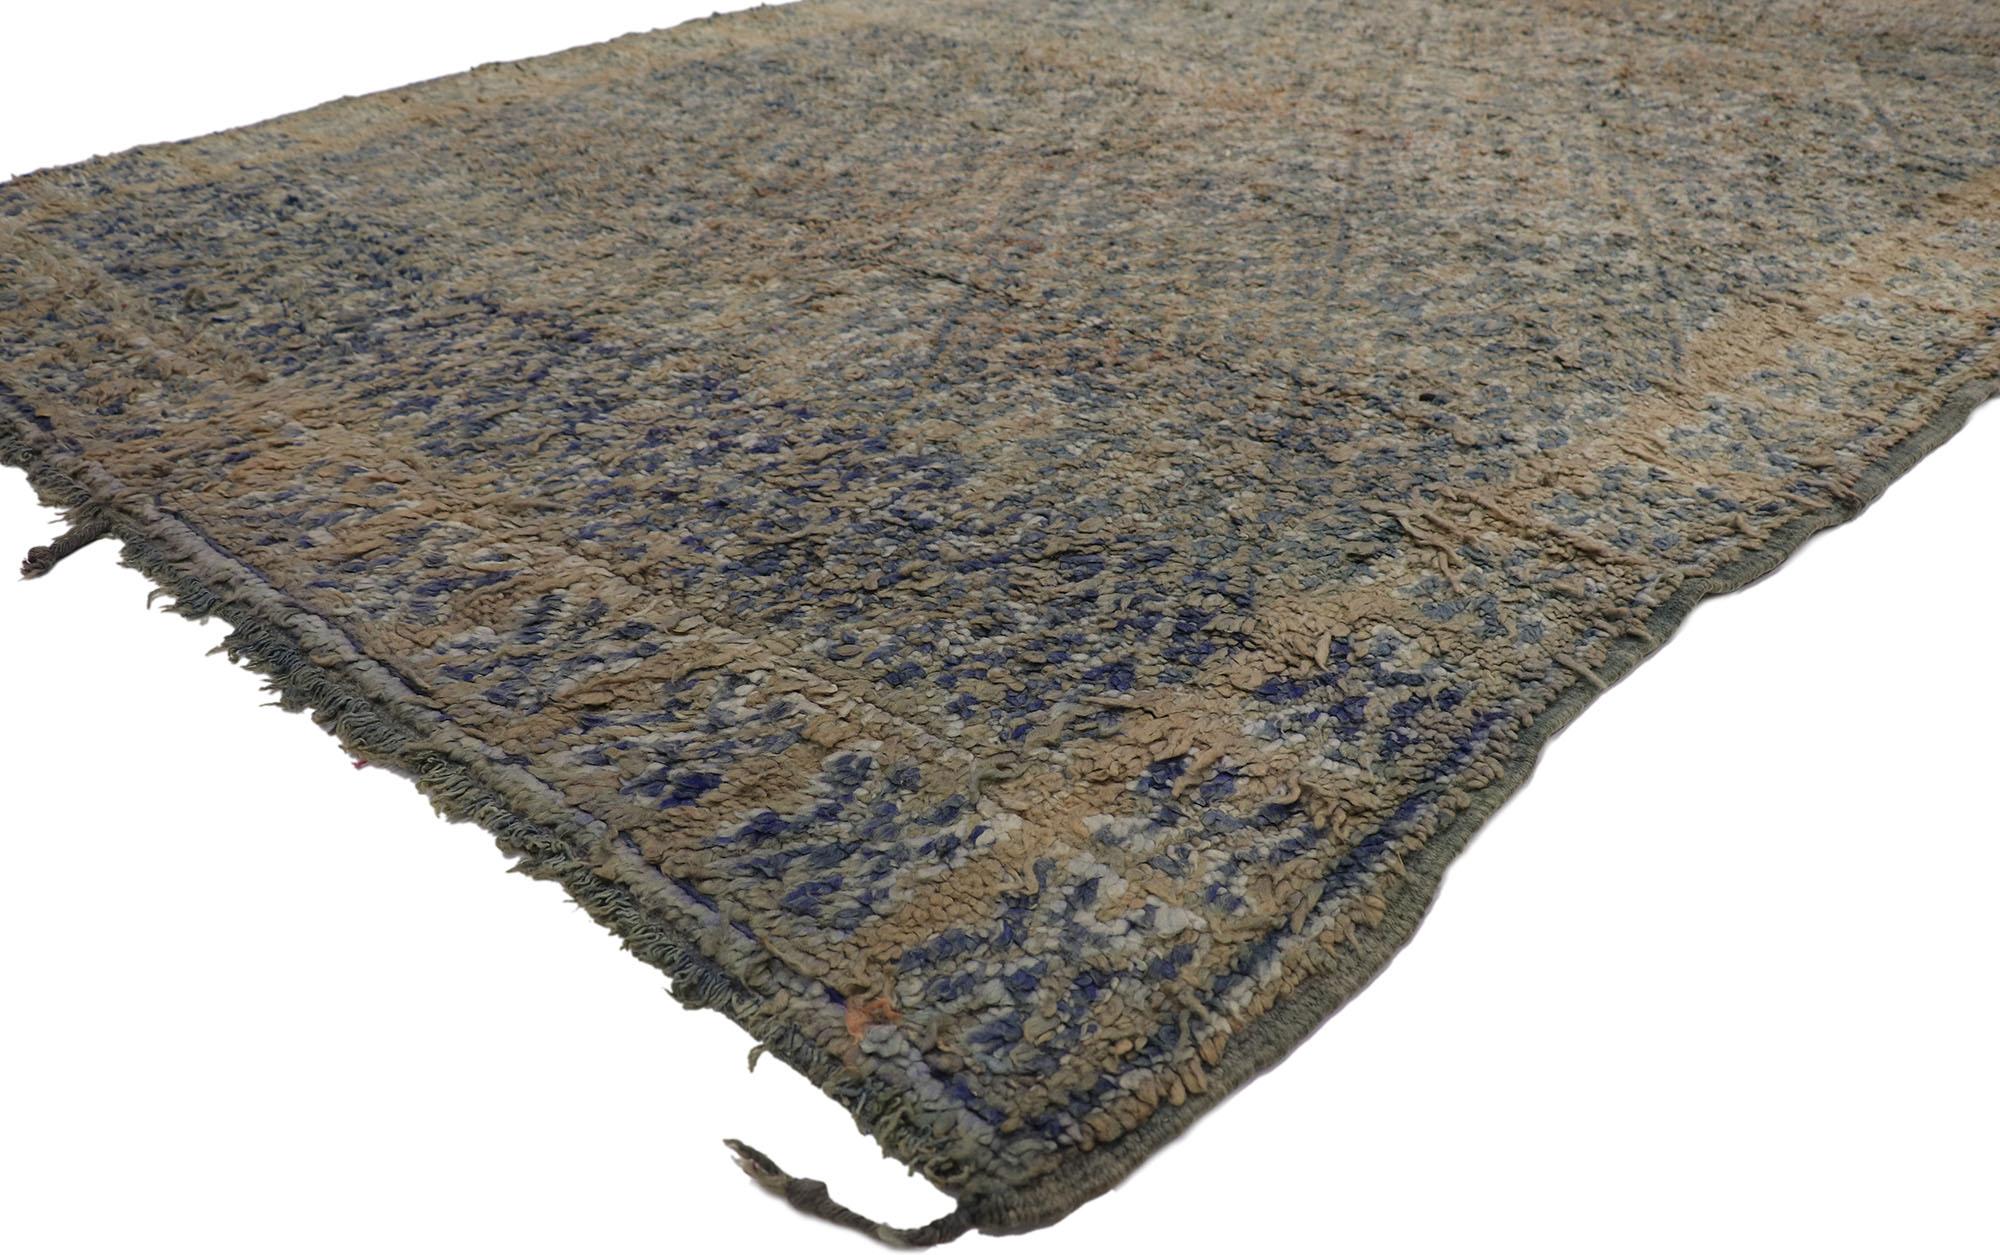 21476, vintage Berber Beni M'Guild Moroccan rug with Bohemian style. Showcasing an expressive design in warm hues, incredible detail and texture, this hand knotted wool vintage Berber Beni M'Guild Moroccan rug is a captivating vision of woven